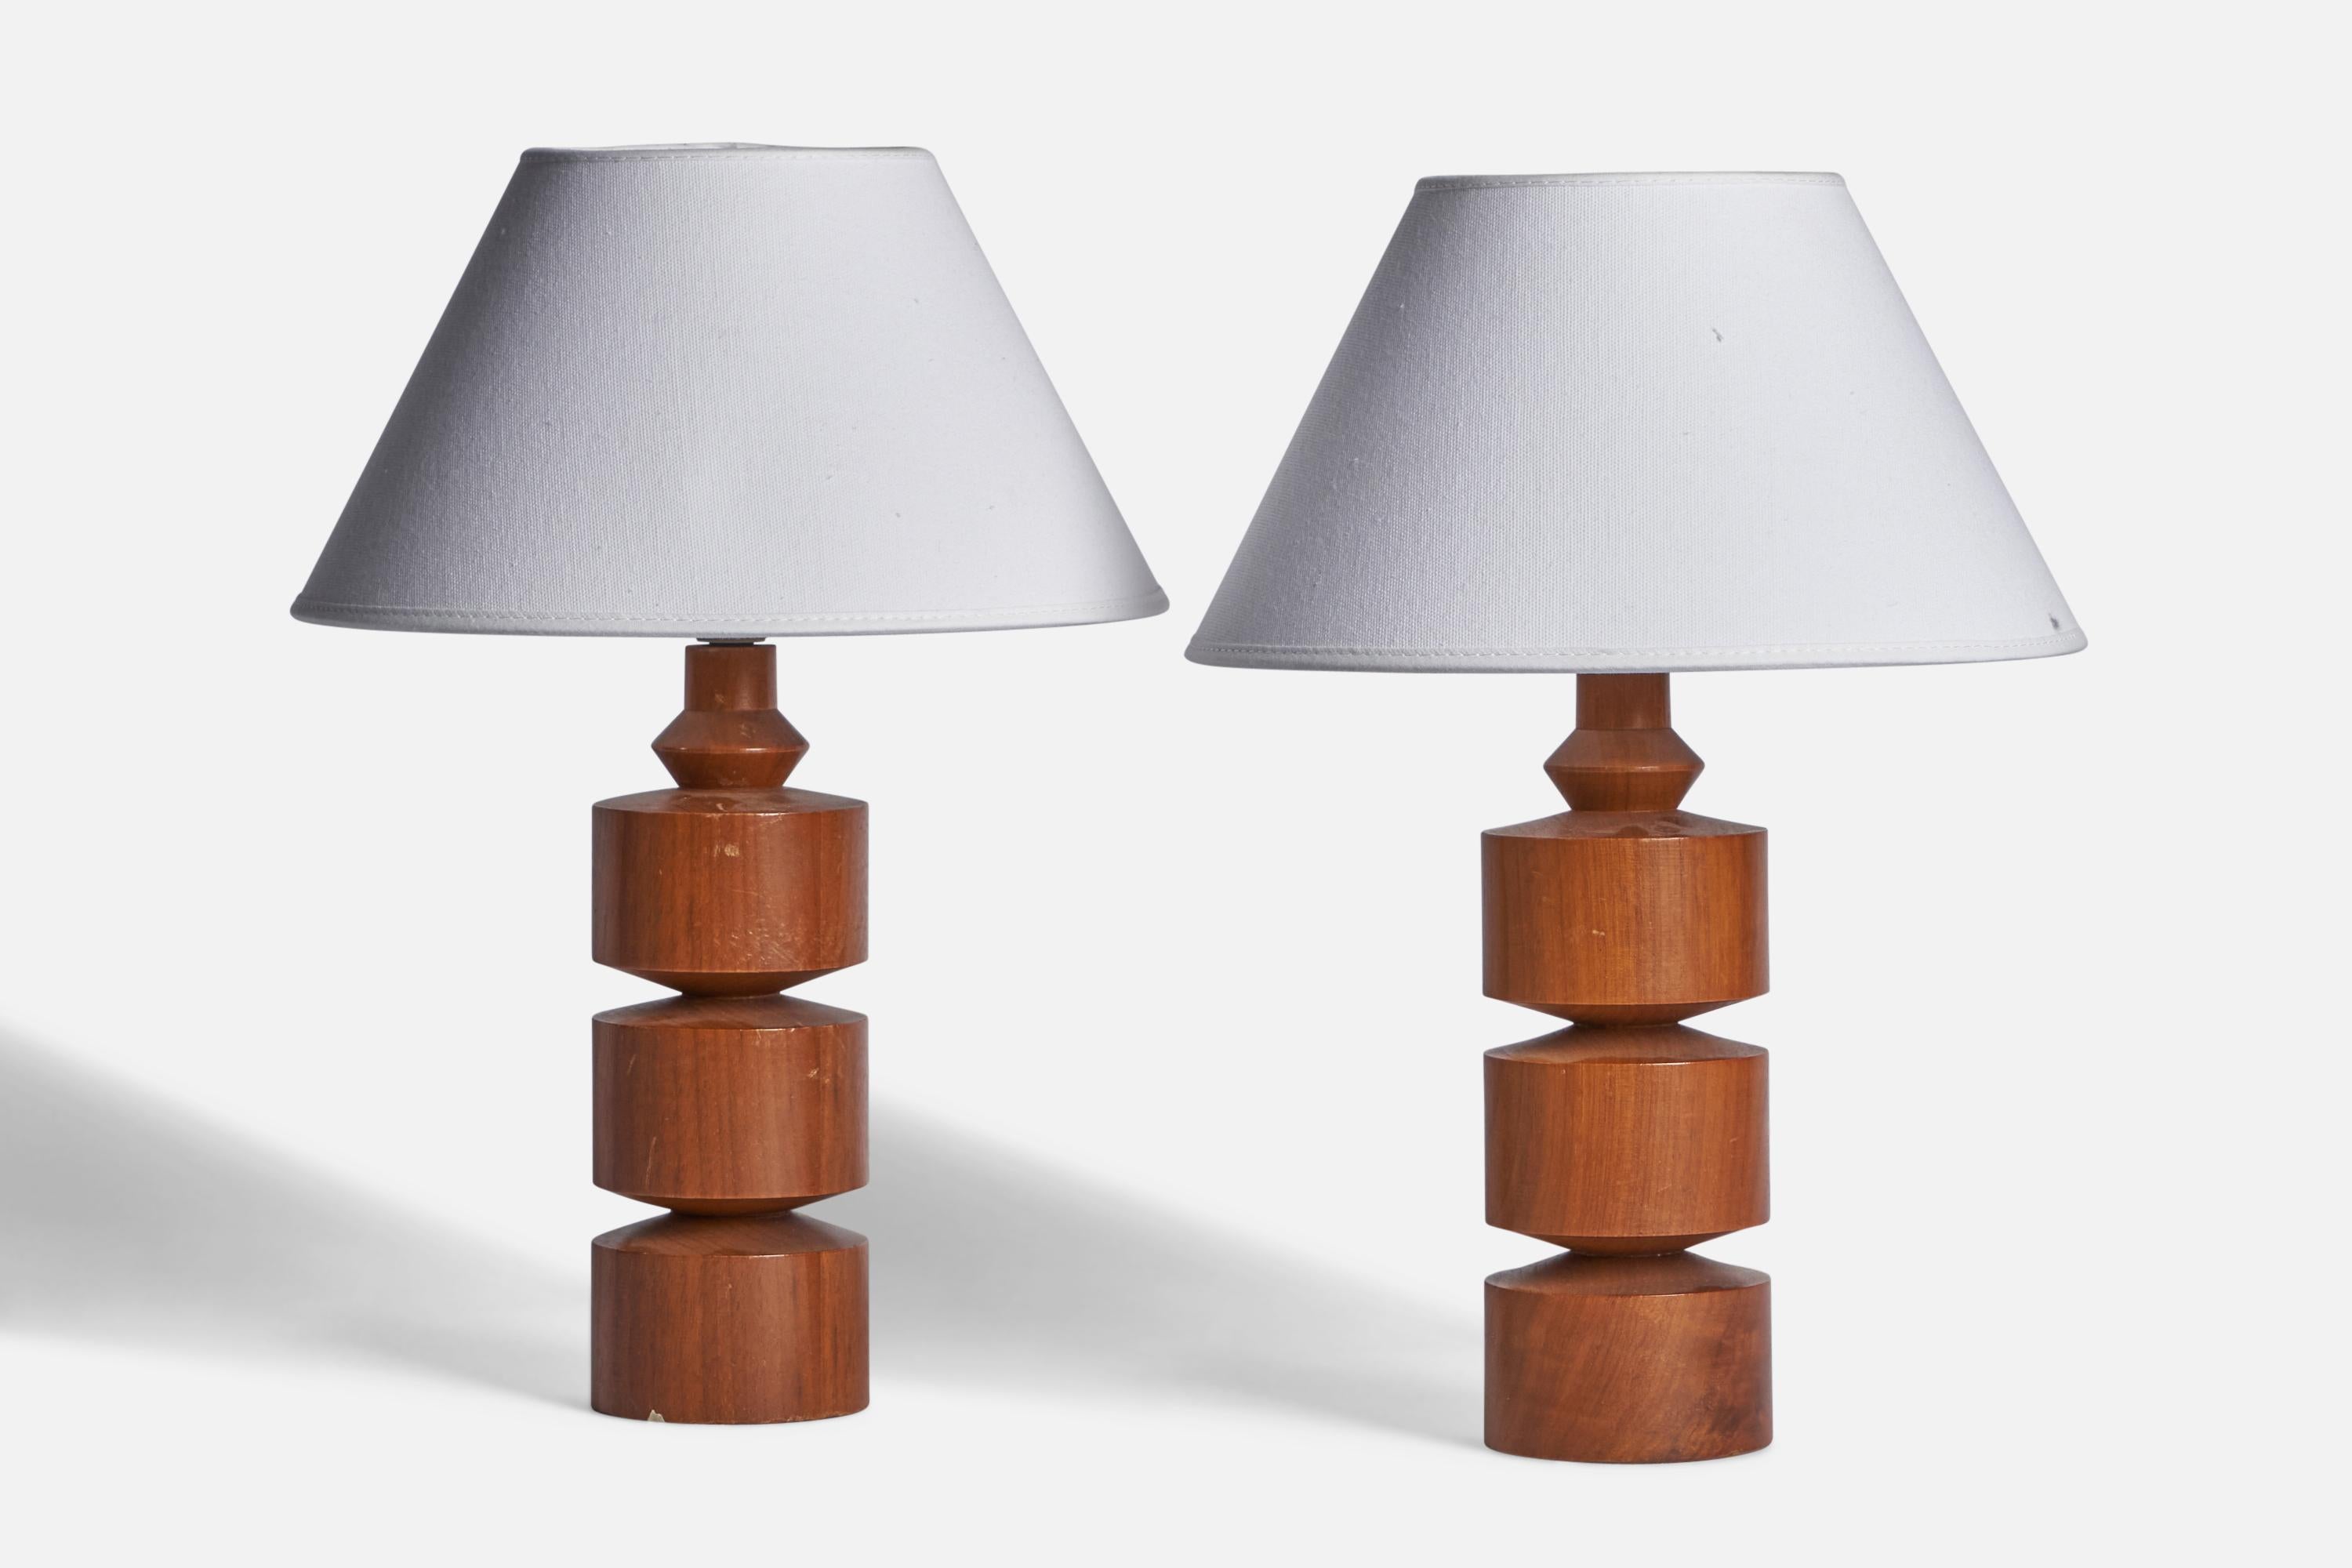 
A pair of teak table lamps designed and produced in Sweden, c. 1950s.
Dimensions of Lamp (inches): 11” H x 3.25” Diameter
Dimensions of Shade (inches): 4.5” Top Diameter x 10” Bottom Diameter x 5.5” H 
Dimensions of Lamp with Shade (inches): 14.5”